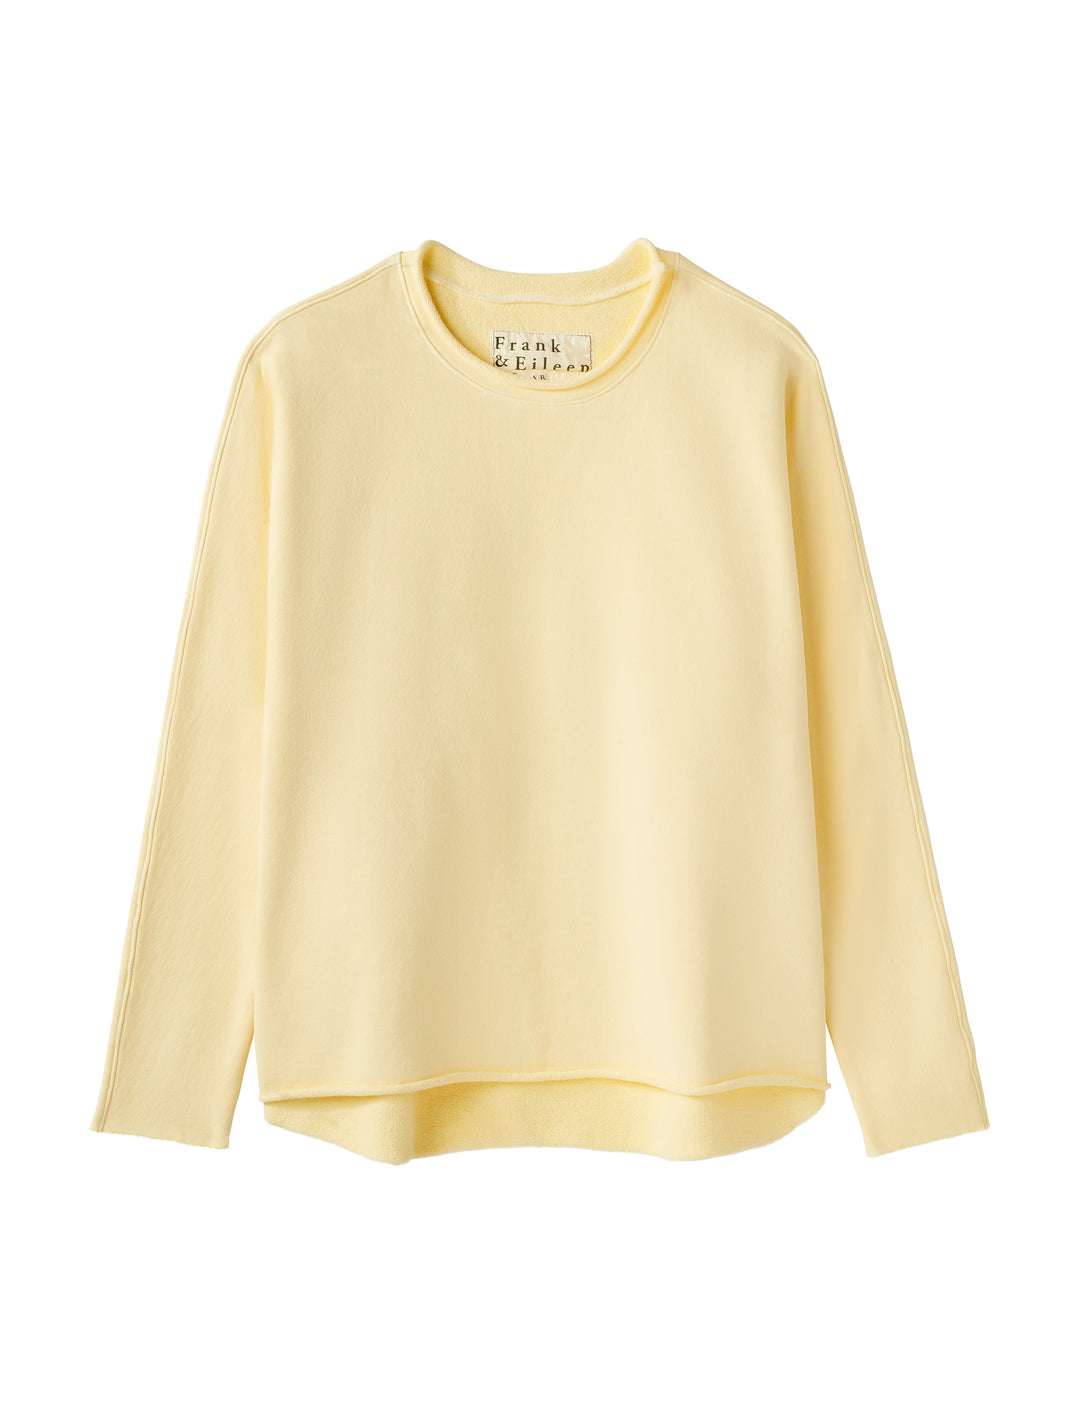 Frank & Eileen - Long Sleeve Capelet in Canary Yellow